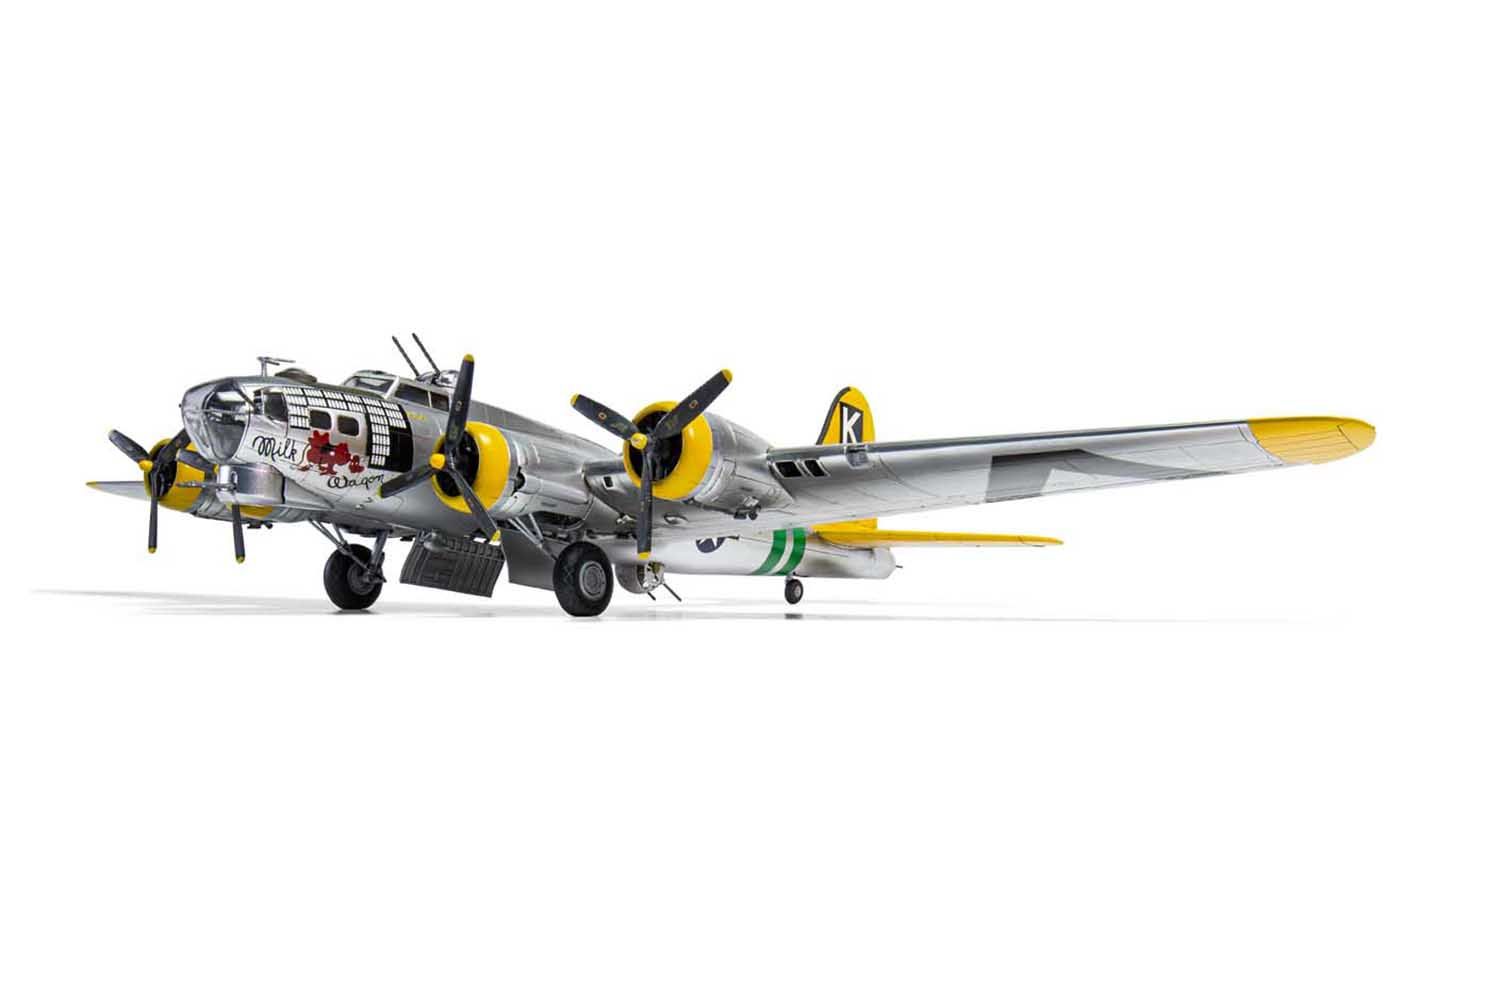 Boeing B17G Flying Fortress (1:72) - Loaded Dice